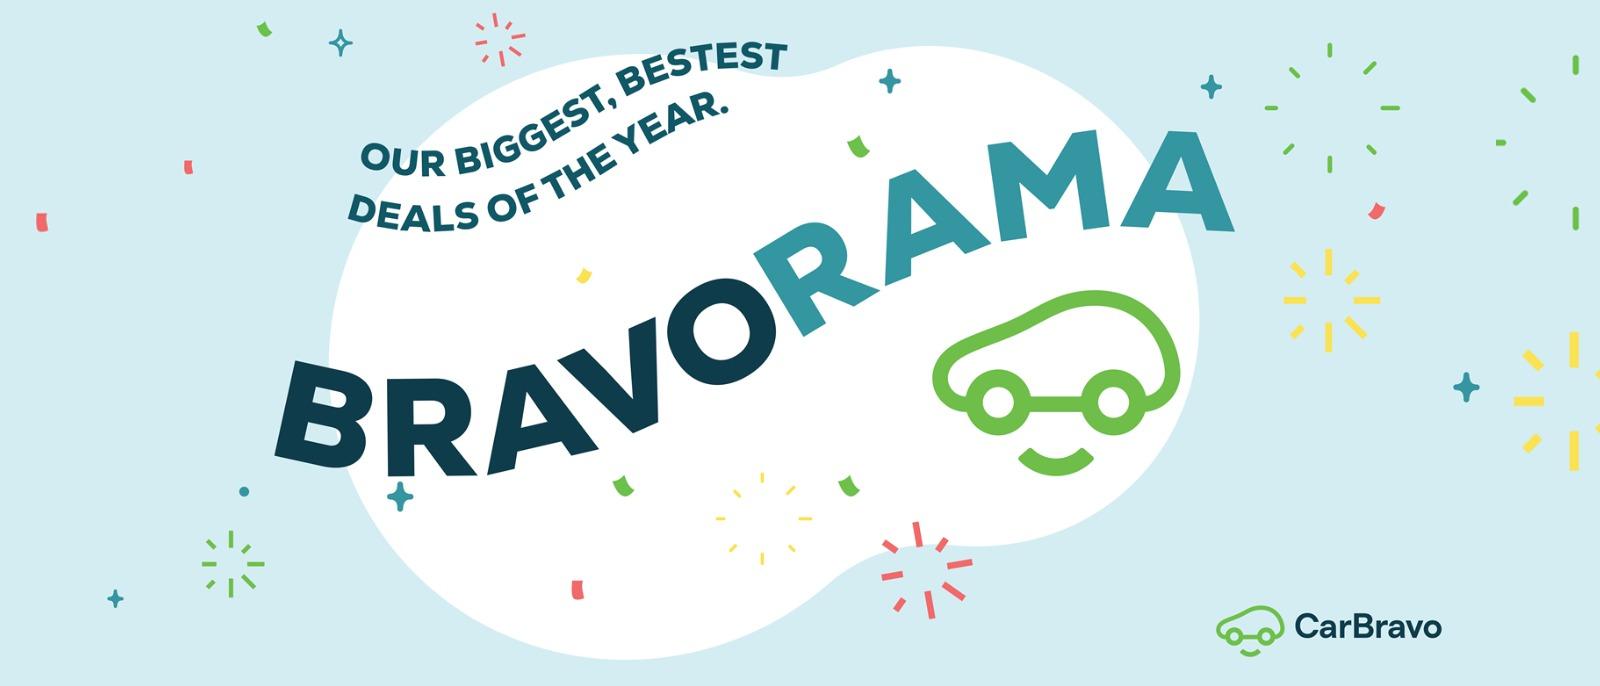 OUR BIGGEST, BESTEST DEALS OF THE YEAR. BRAVORAMA